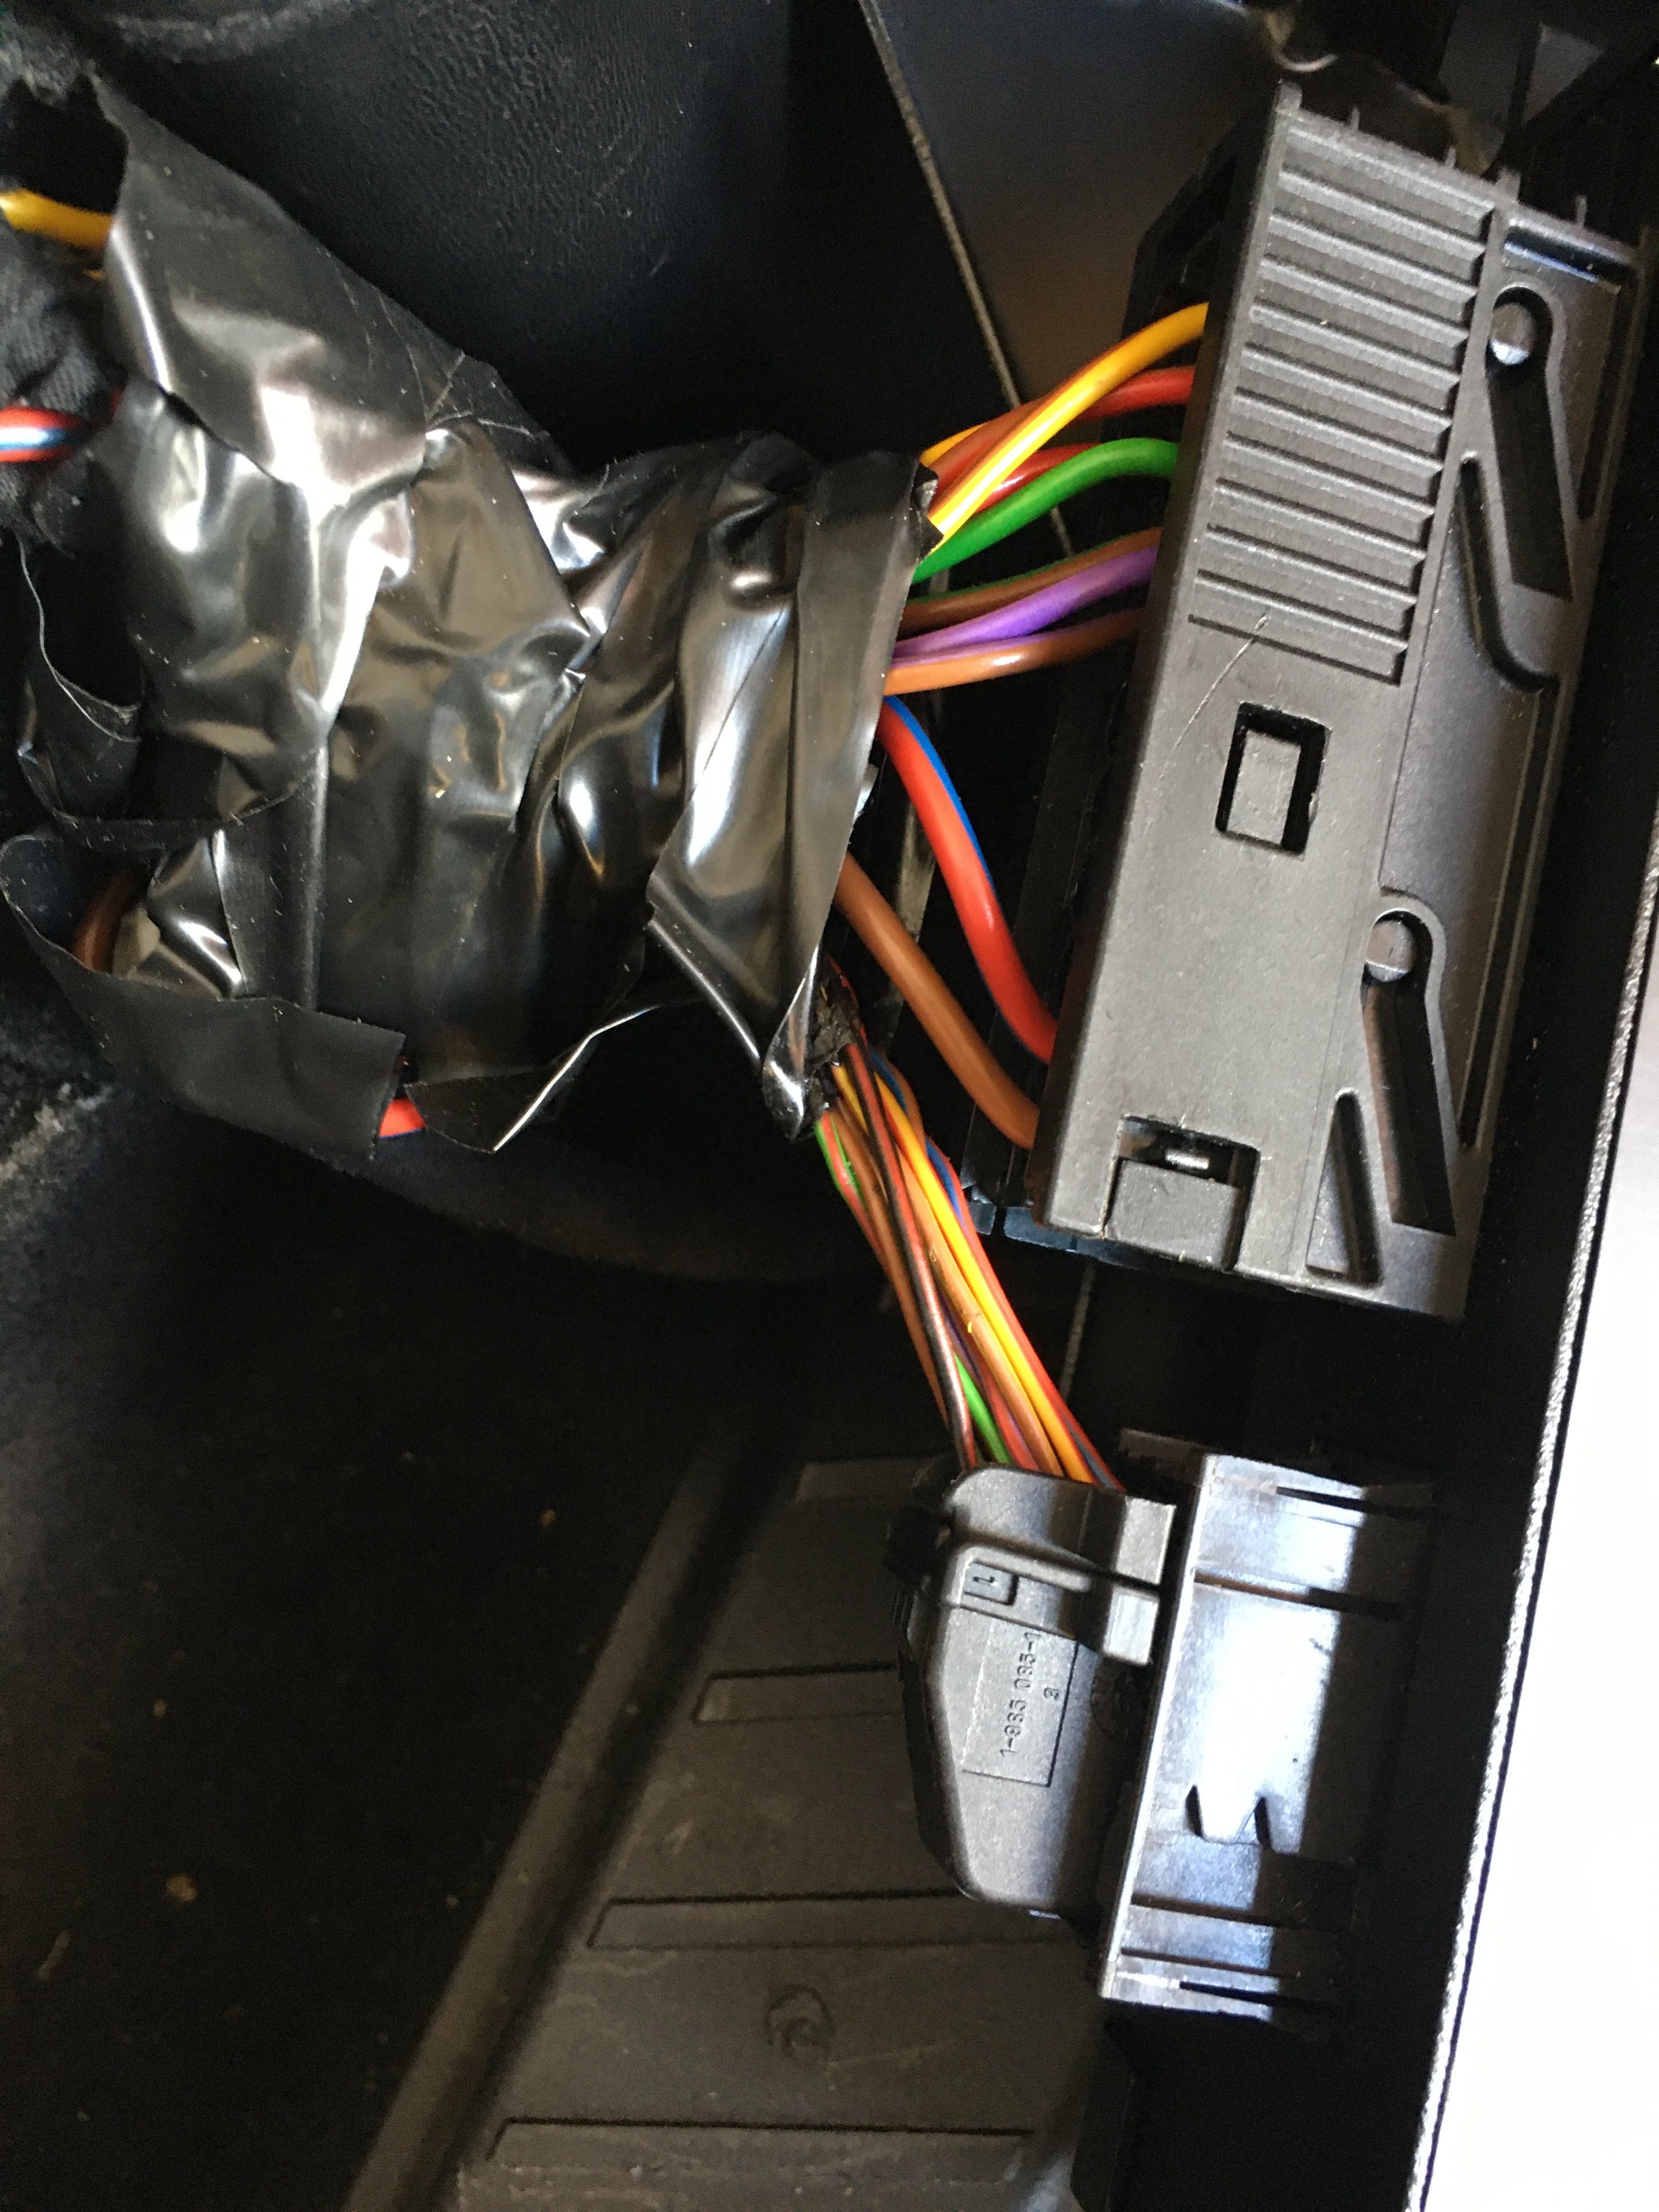 Wires going into front amp